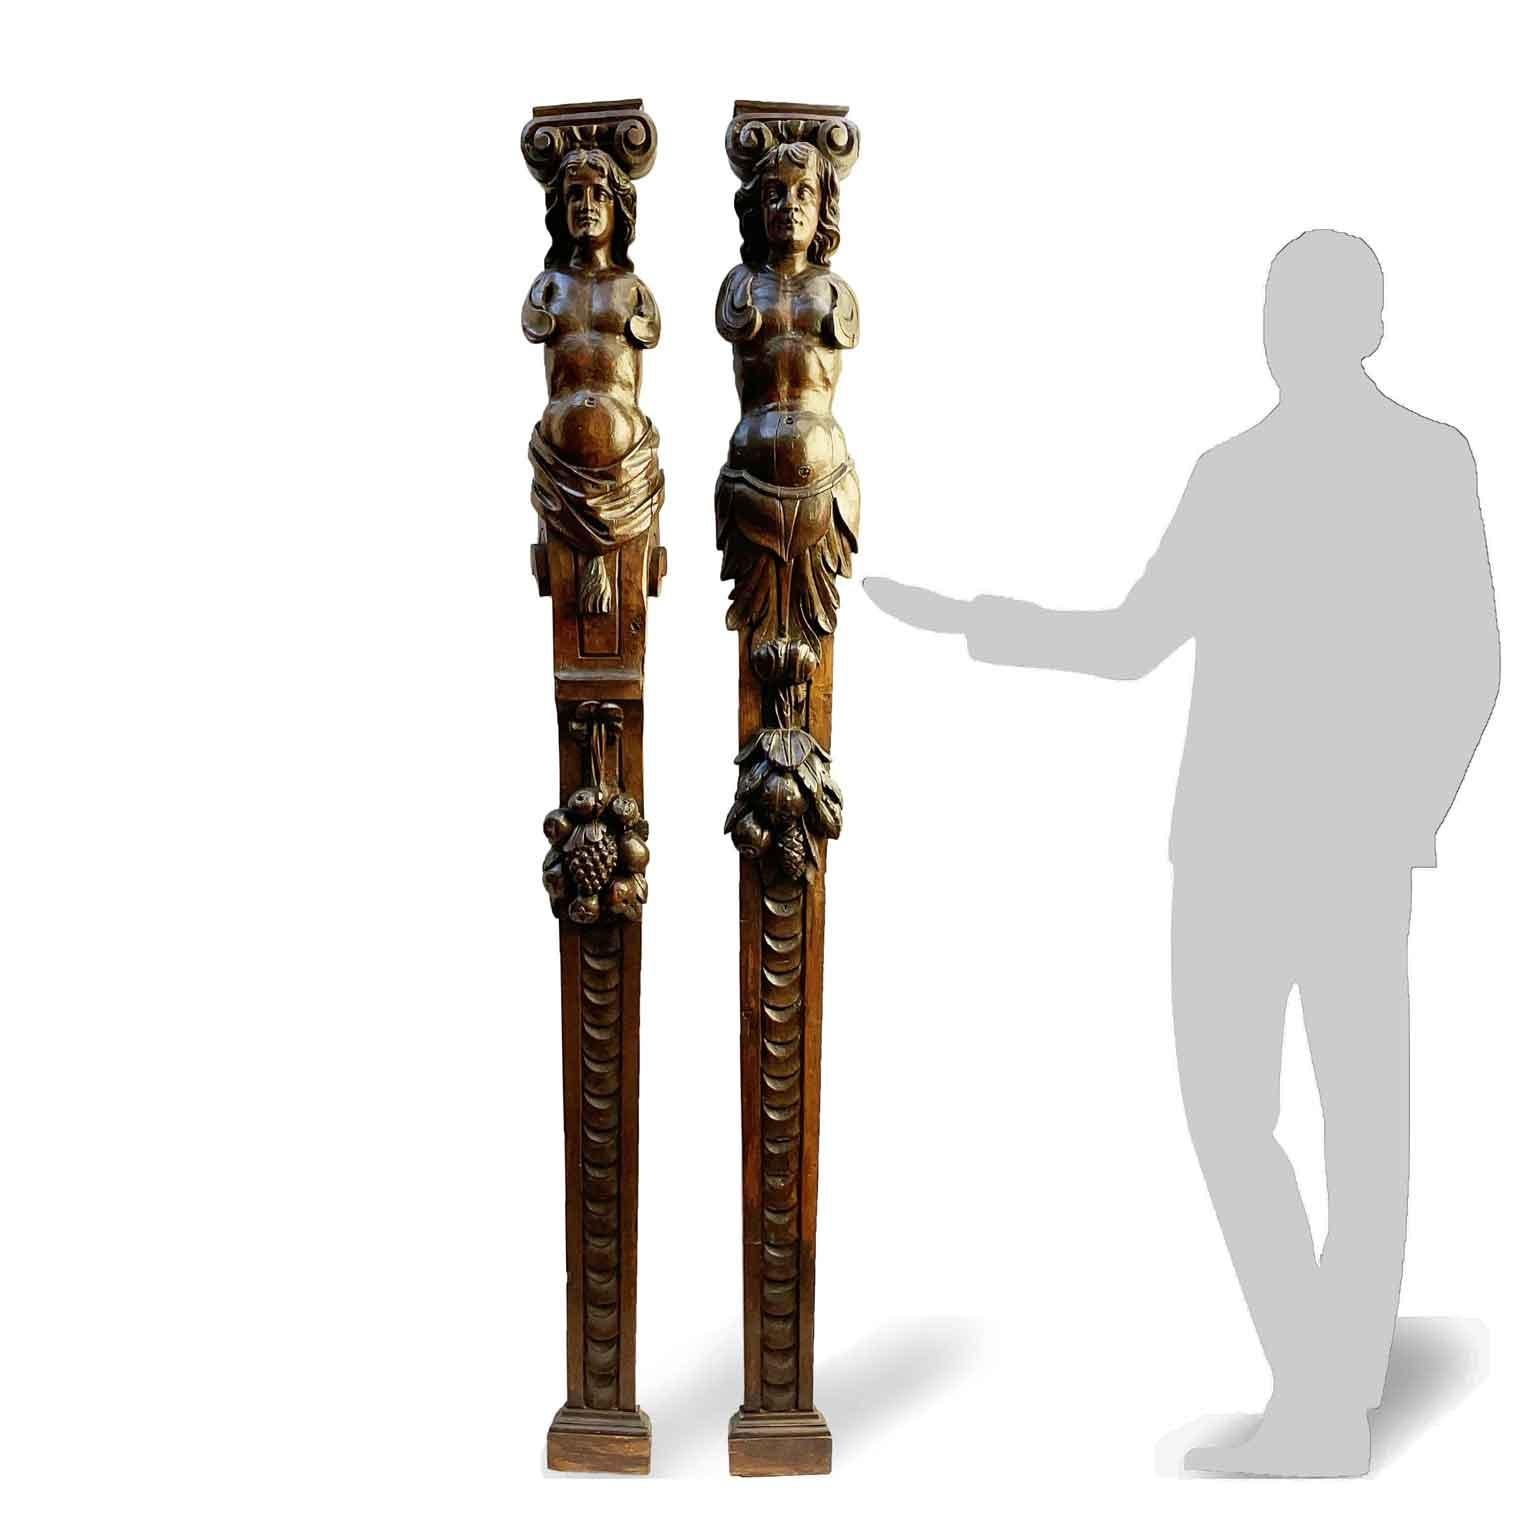 Unique pair of Italian hand-carved caryatids, dating back to 1500 circa, almost 83 inches 210cm high, this antique pair of dark patina Renaissance sculptures comes from a choral ensemble, used as partitions between the stalls. The two bas-relief